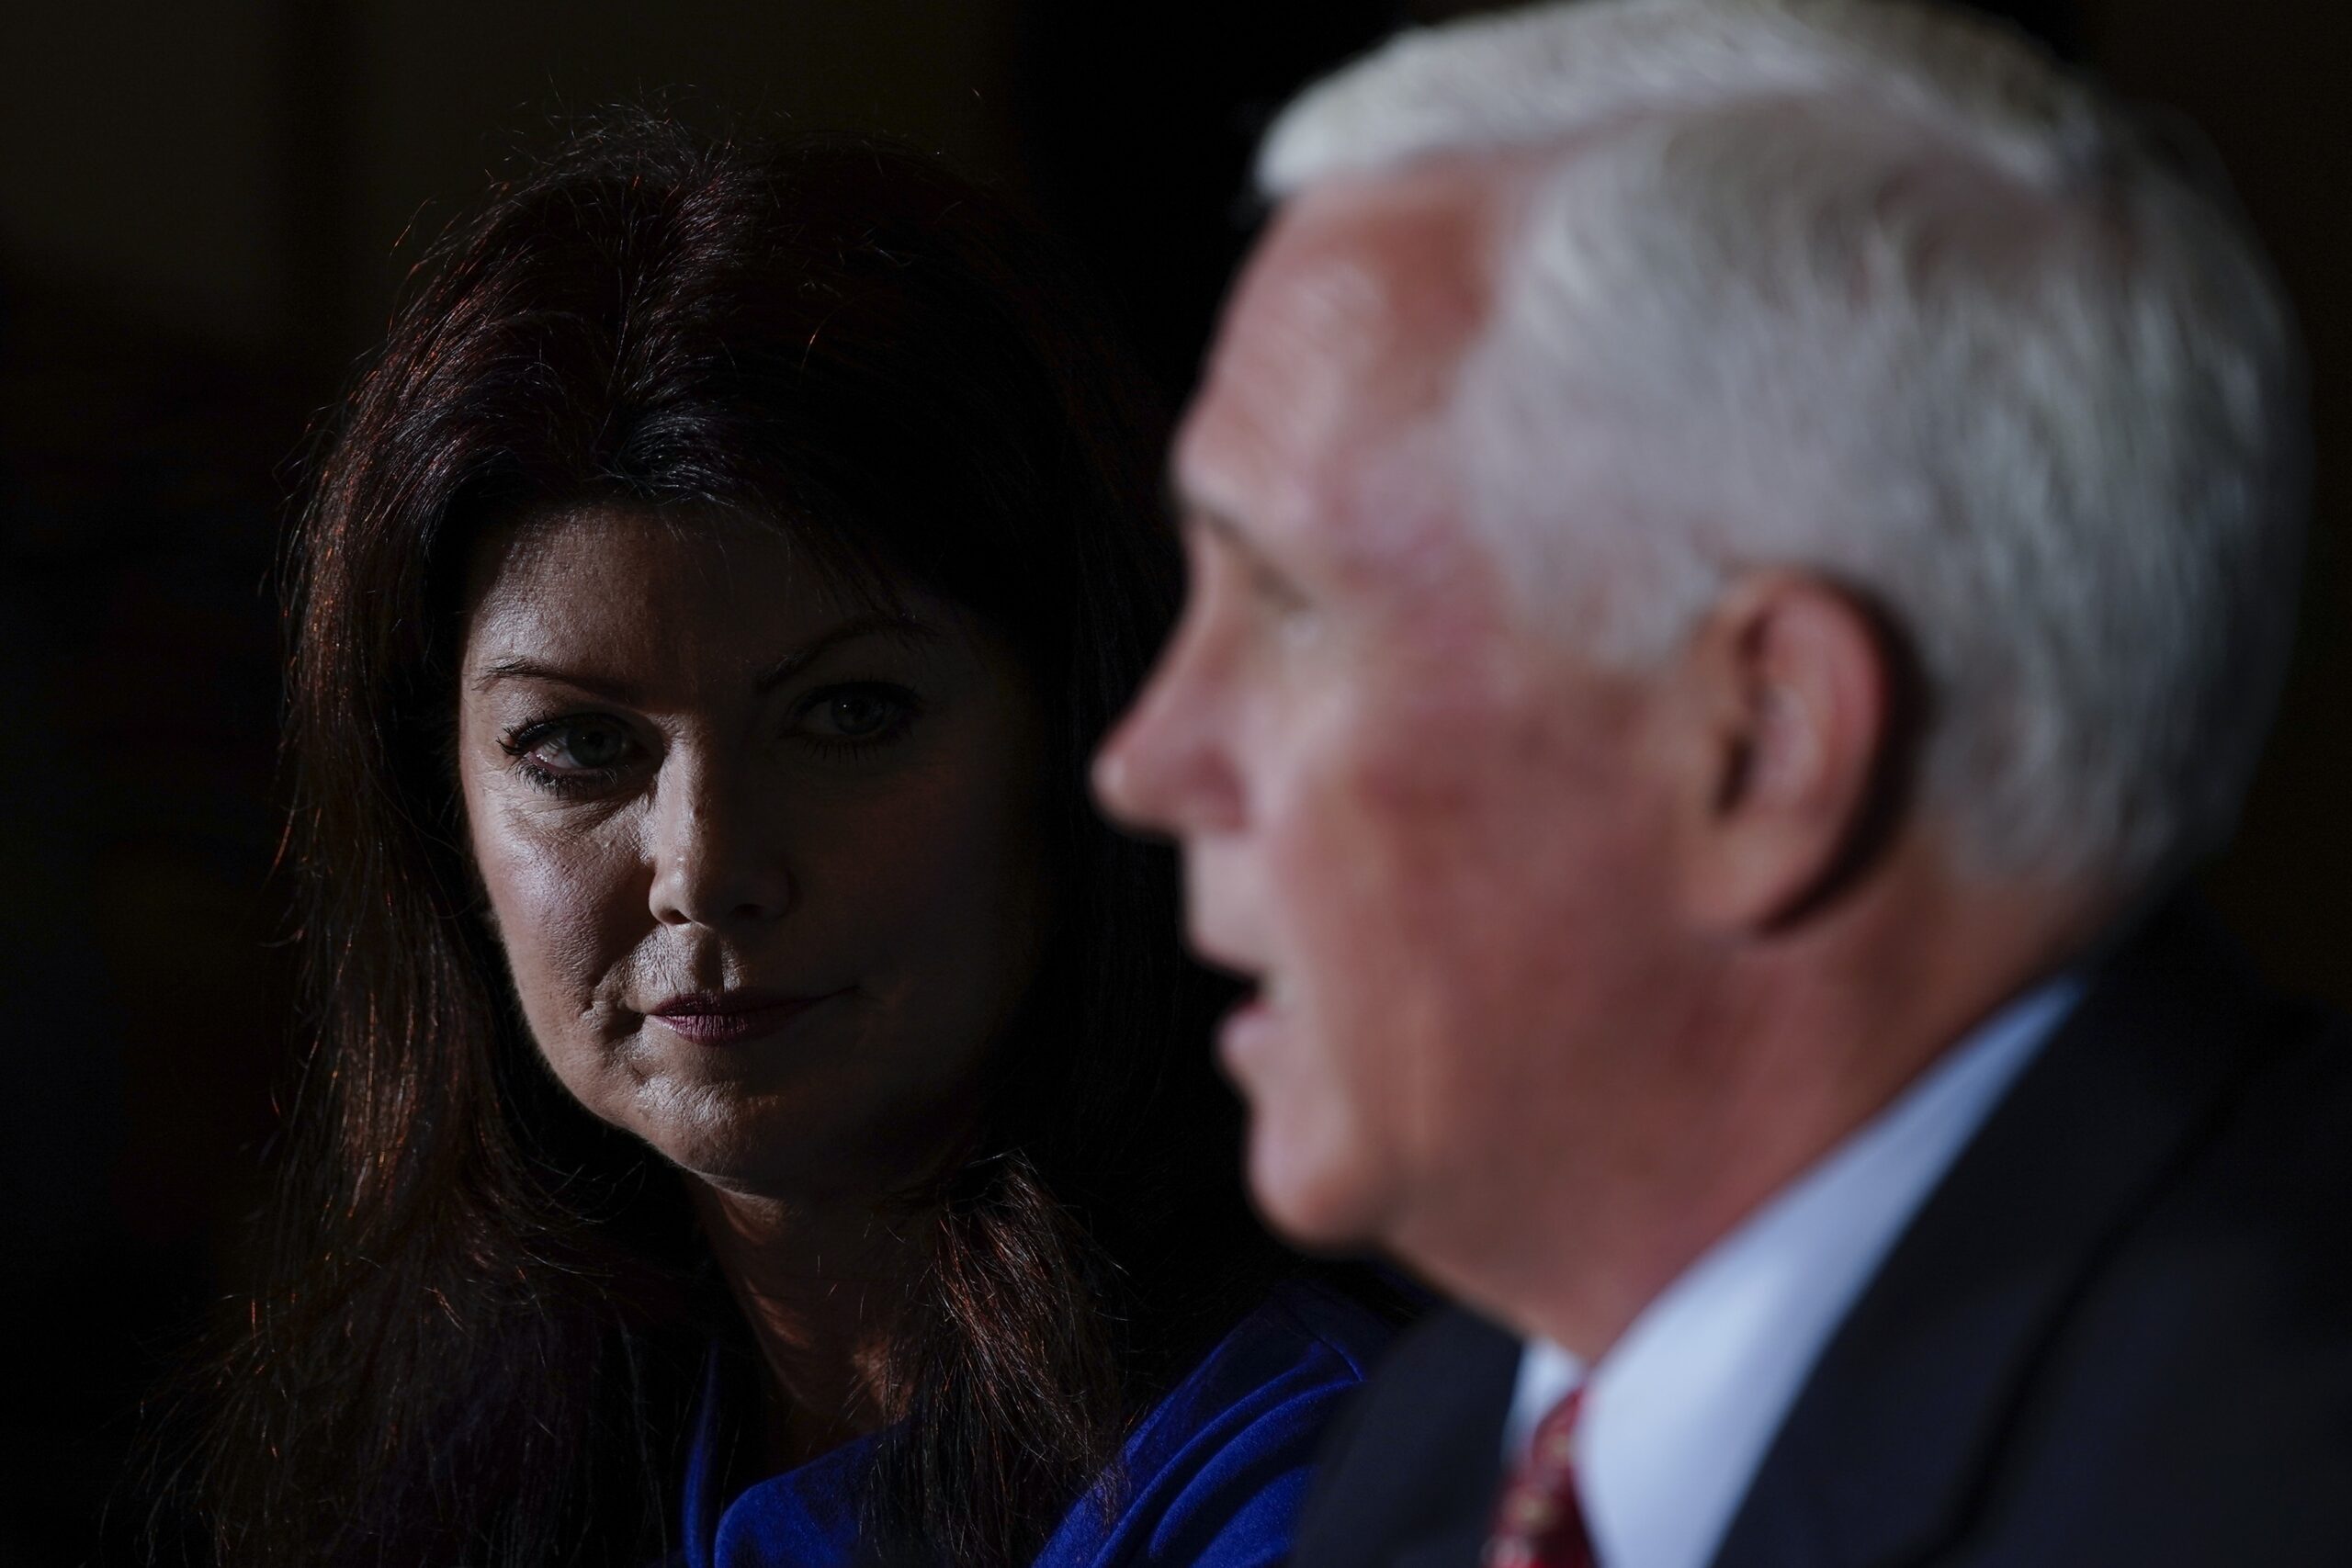 Wisconsin Republican governor candidate Rebecca Kleefisch looks at former Vice President Mike Pence